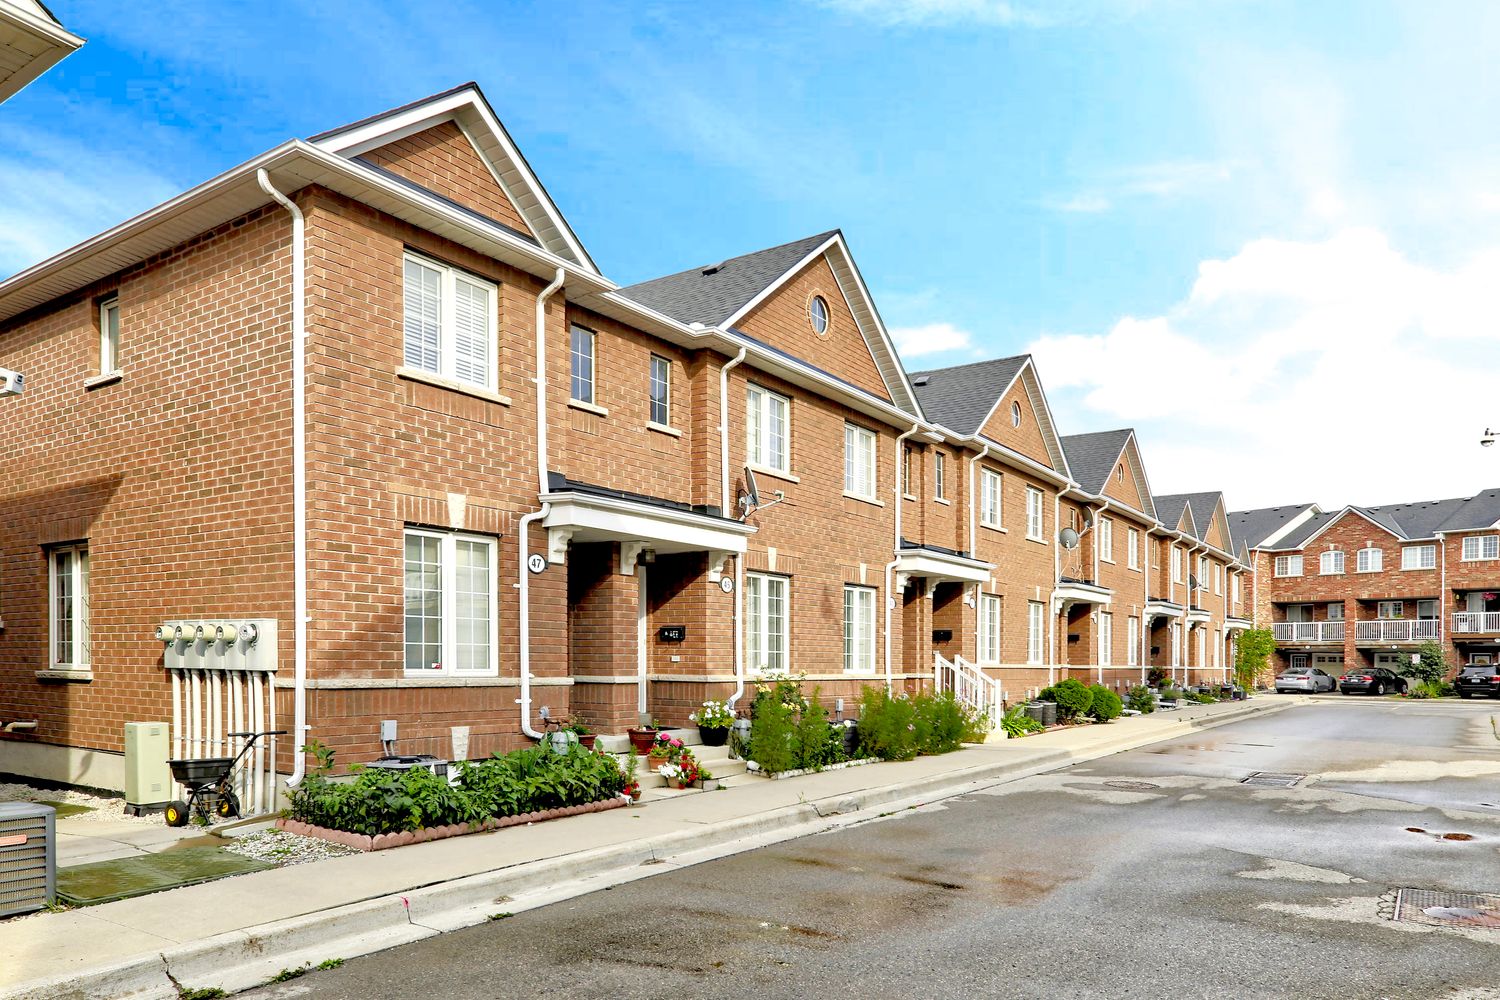 7-21 Weston Road. Townhomes of St. Clair II is located in  West End, Toronto - image #1 of 4